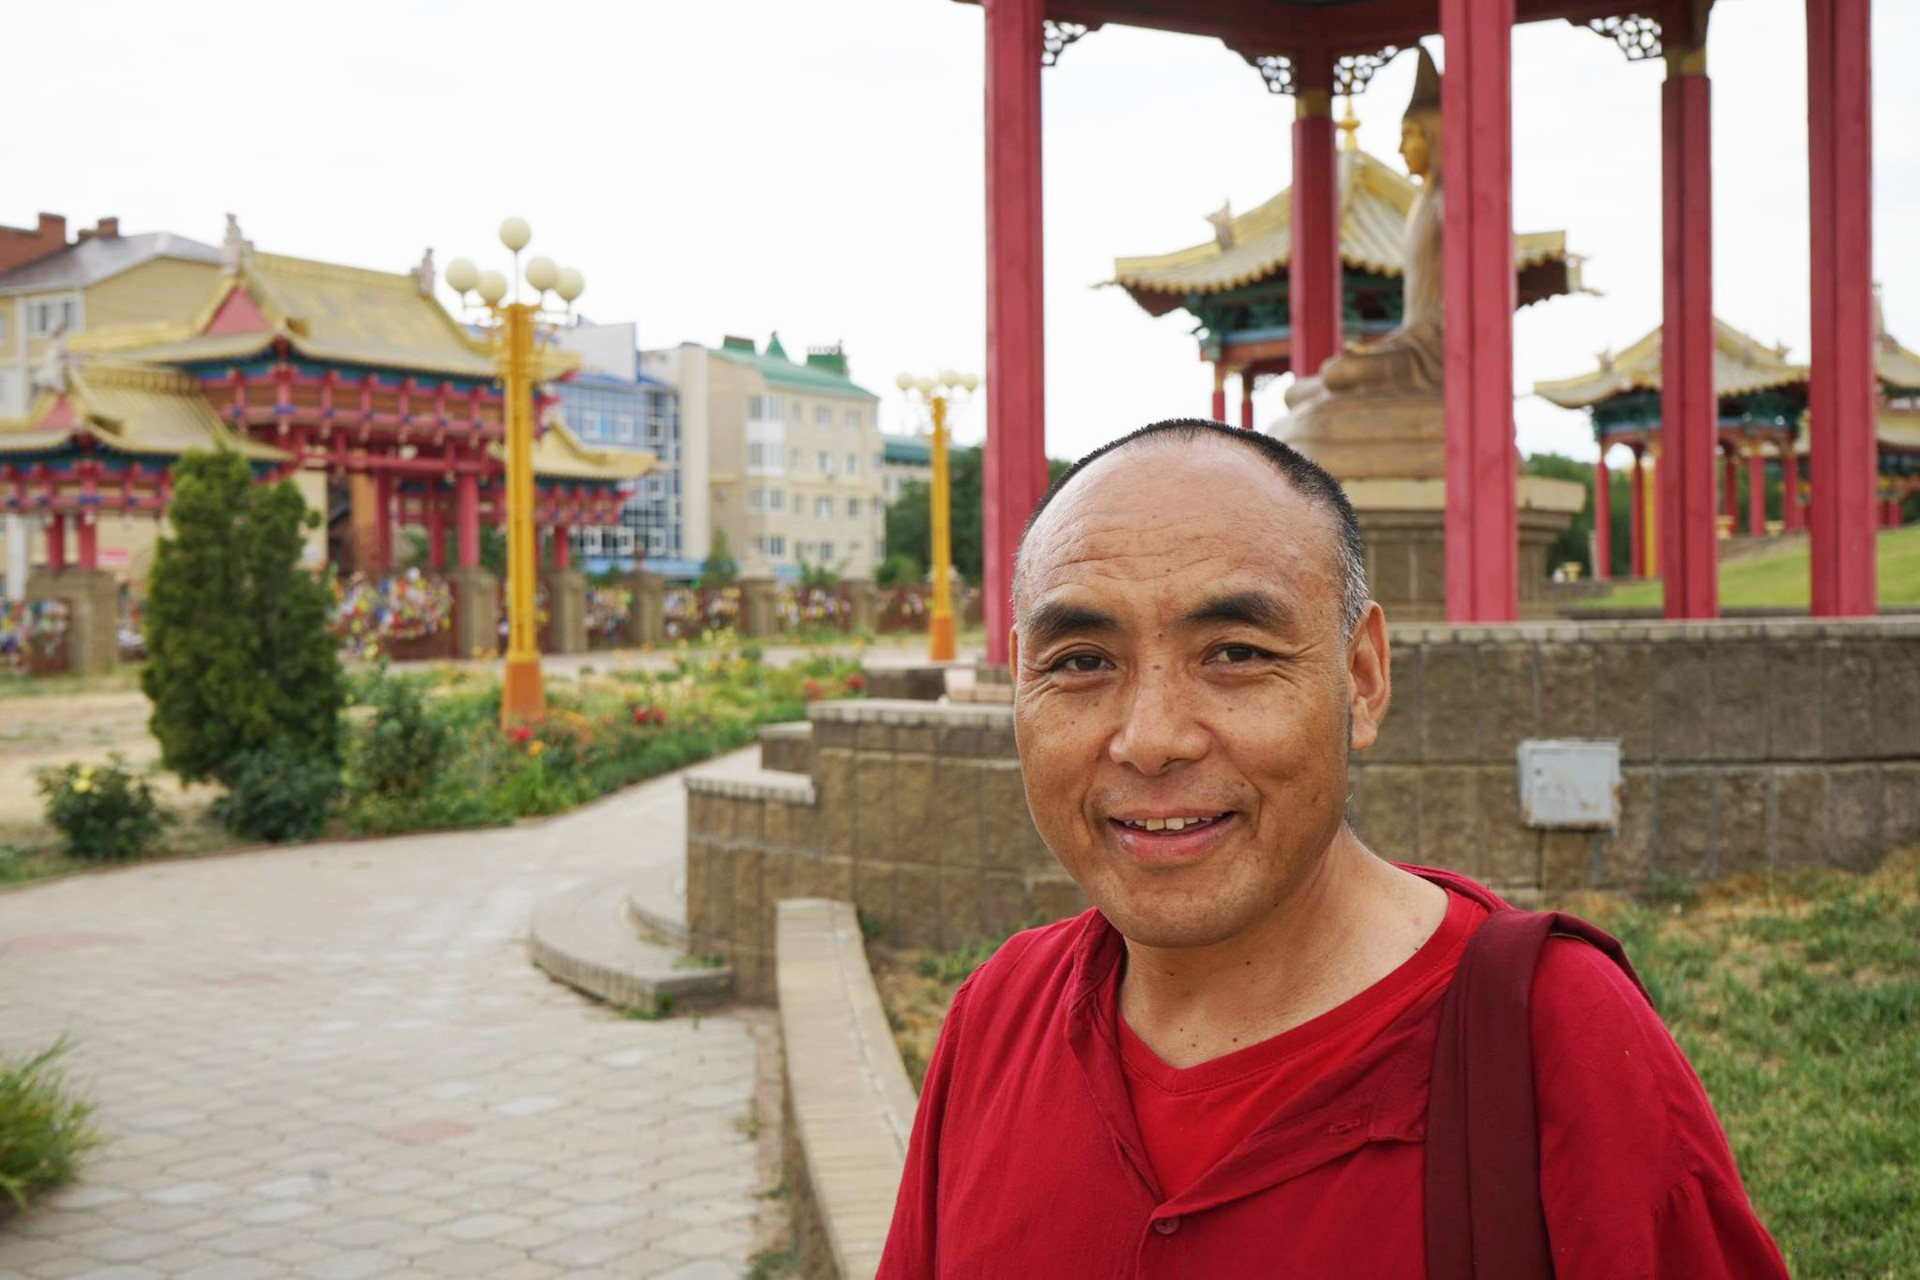 Gen Pen Tso is a Buddist monk from Tibet who has been living in Kalmykia in Southern Russia since 2006 to work at one of the local temples. He now speaks fluent Russian and Kalmyk. He also owns his own village shrine and parish in the Volgograd region. 